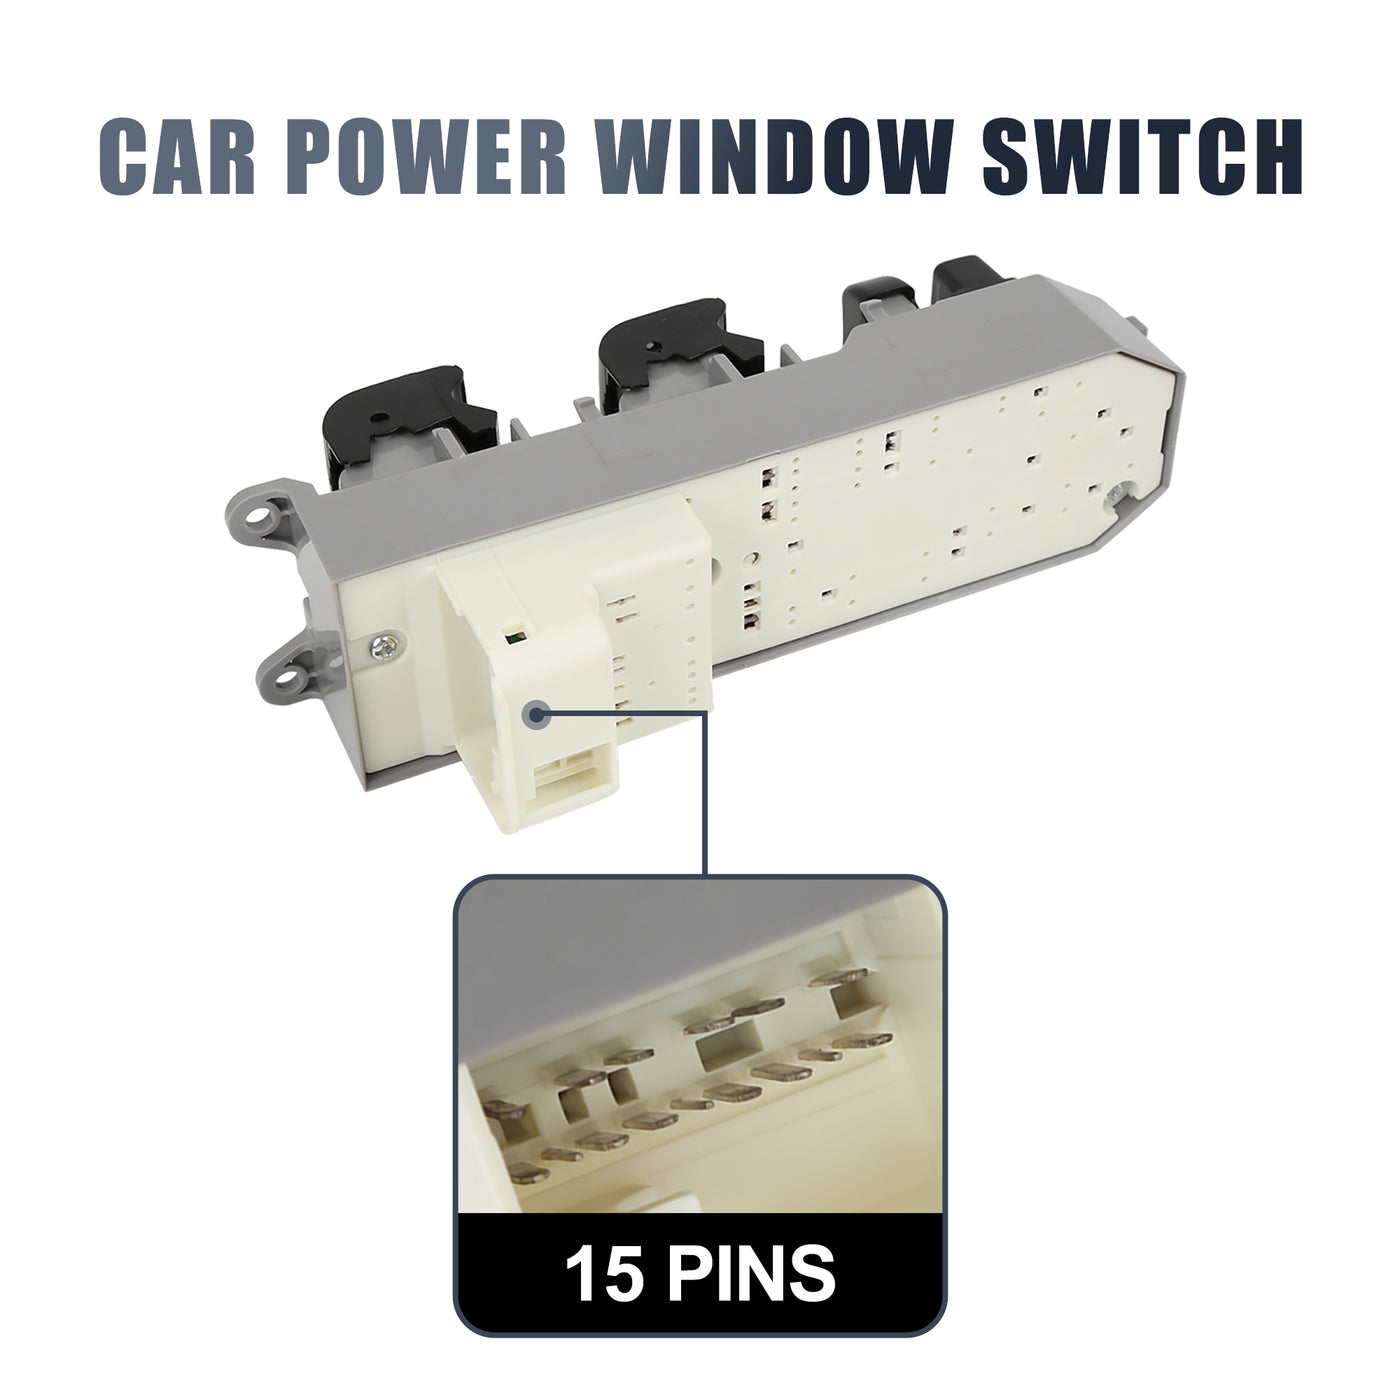 X AUTOHAUX No.84820-06100 Car Front Left Power Master Window Switch for Toyota Camry Corolla Highlander RAV4